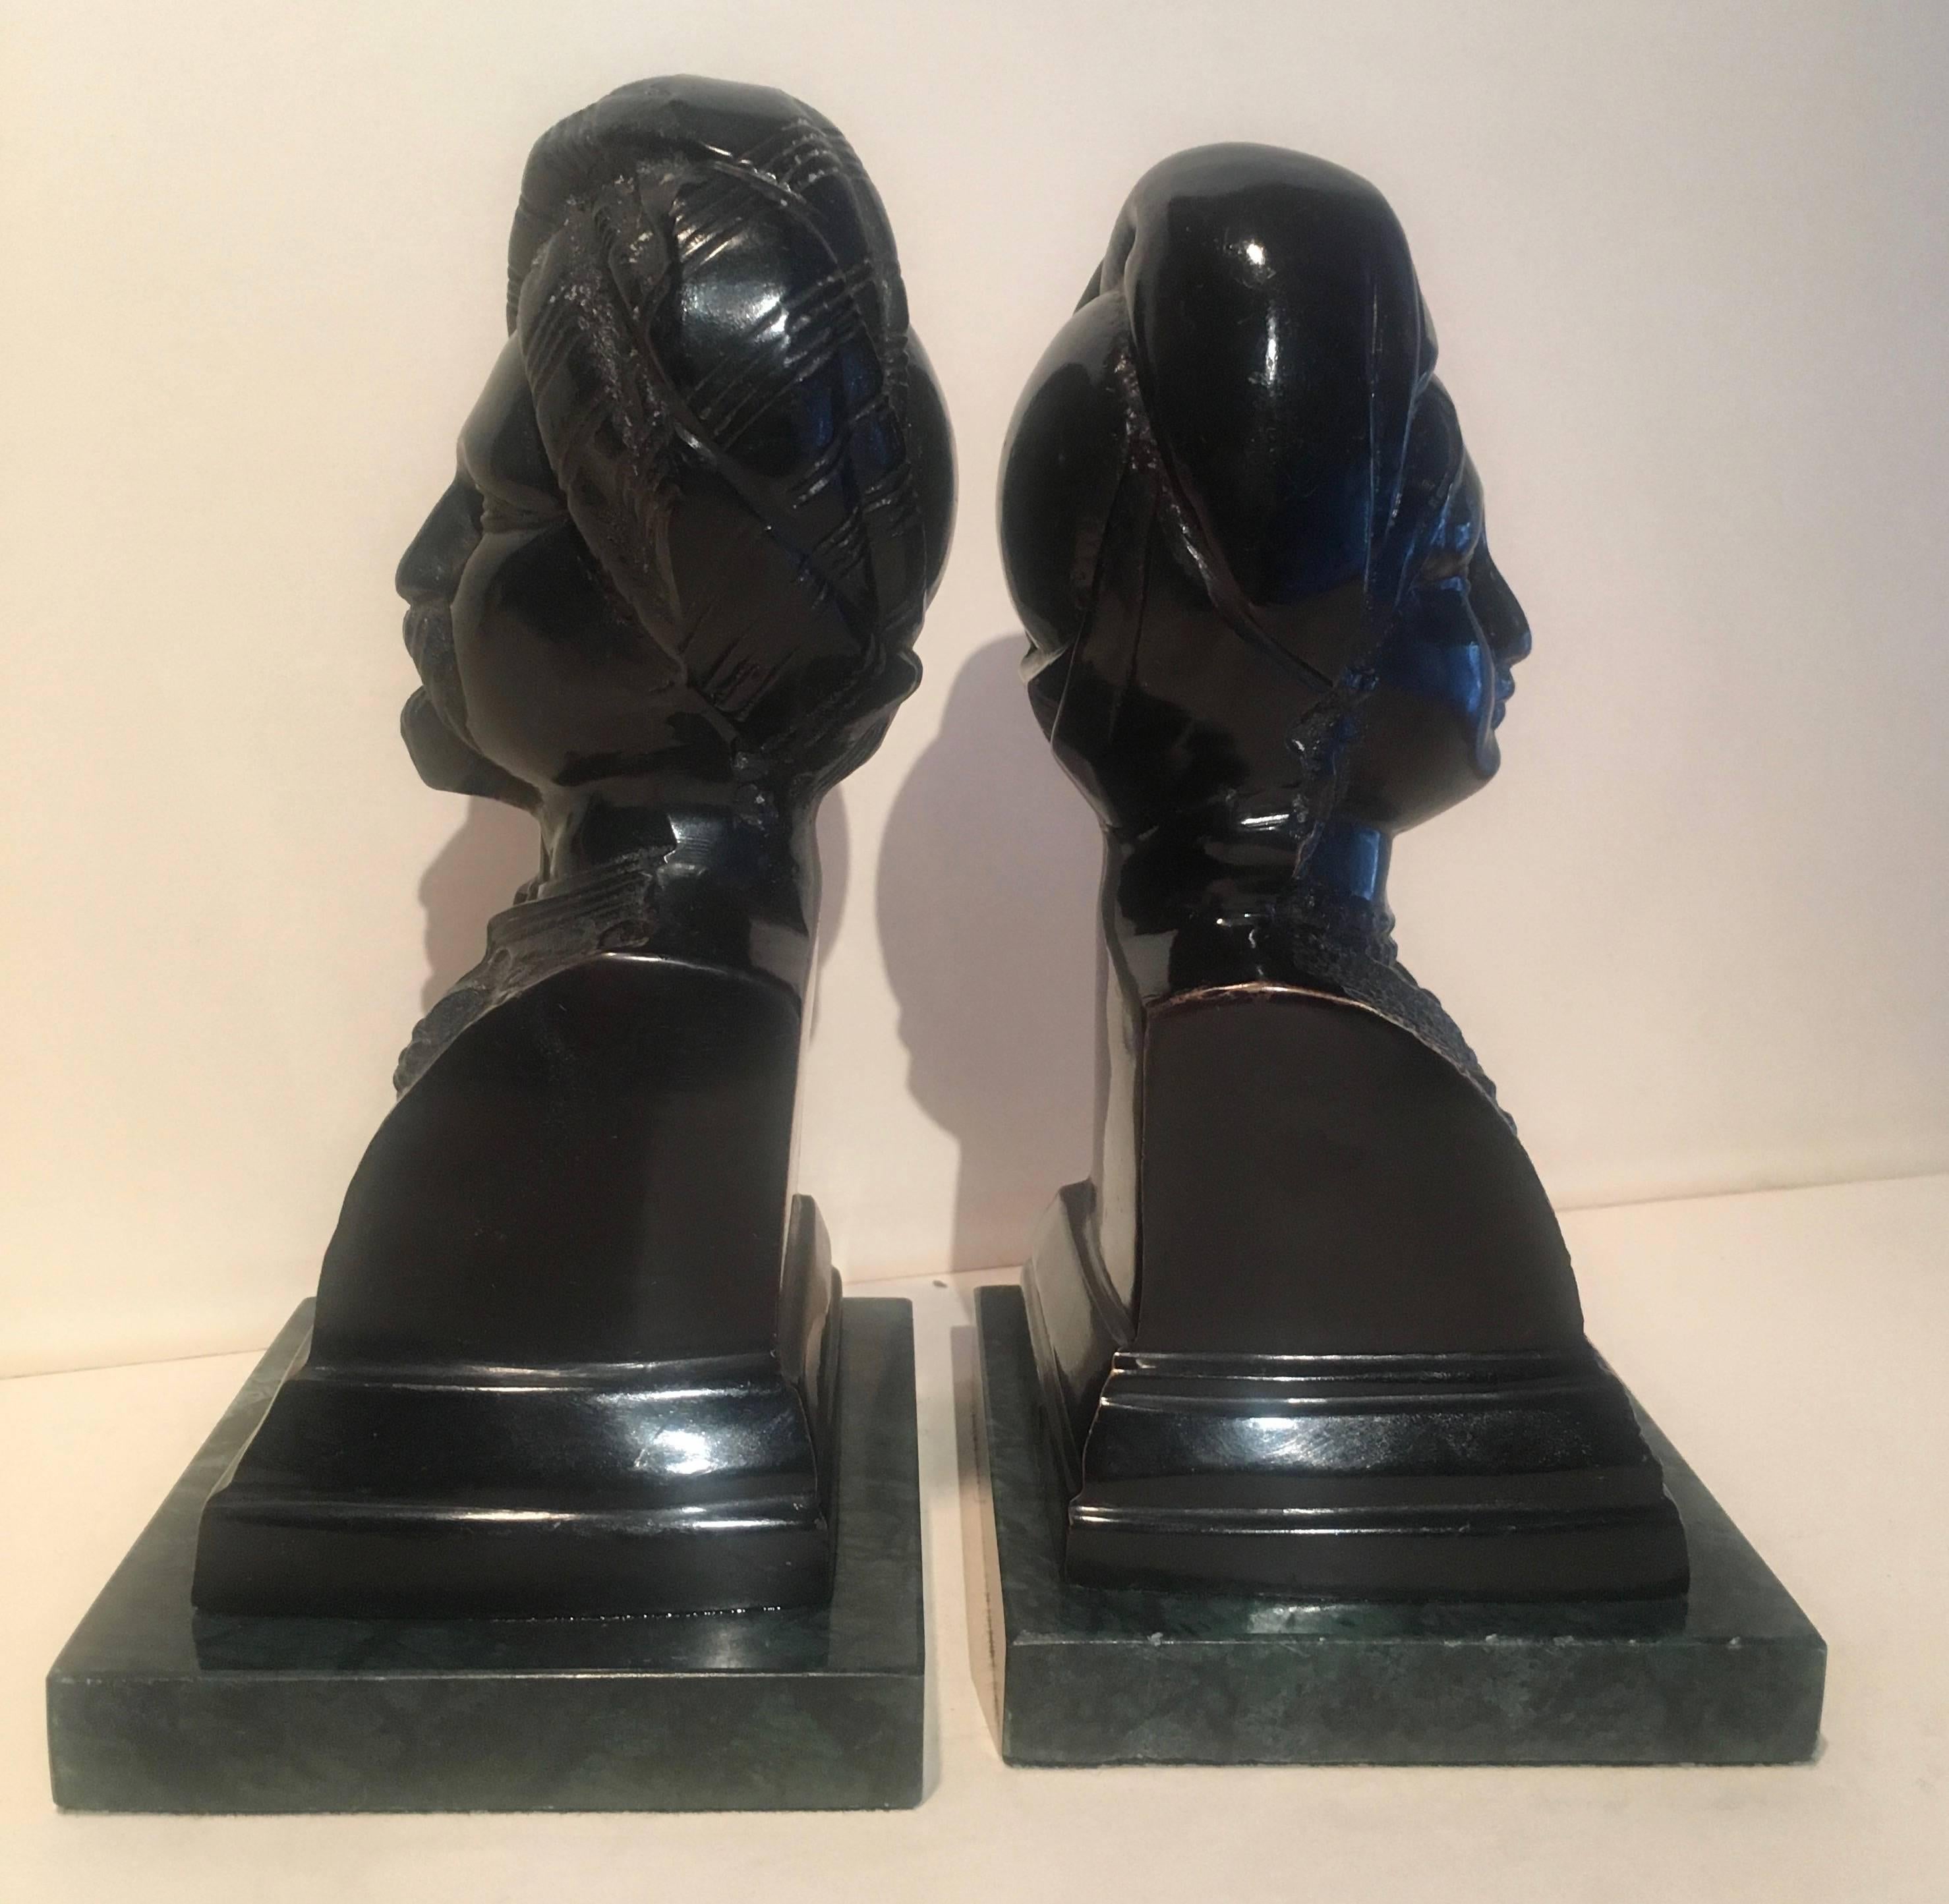 Lovely pair, Maharaja or Maharani bookends, lacquered black on plaster with Verde marble base.